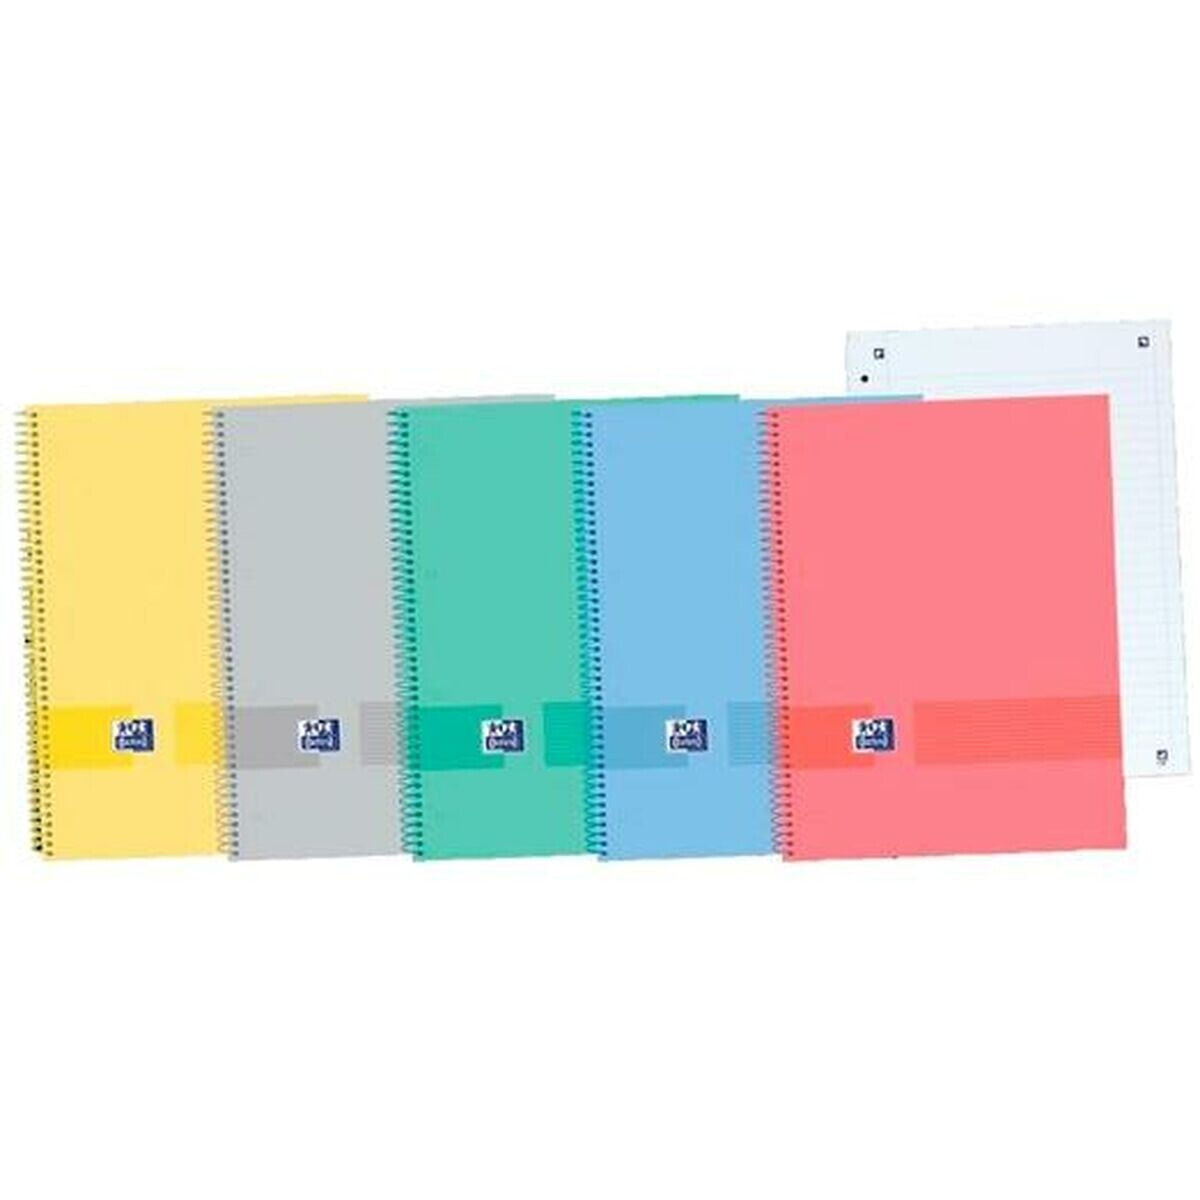 Notebook Oxford Hard cover (Refurbished A)